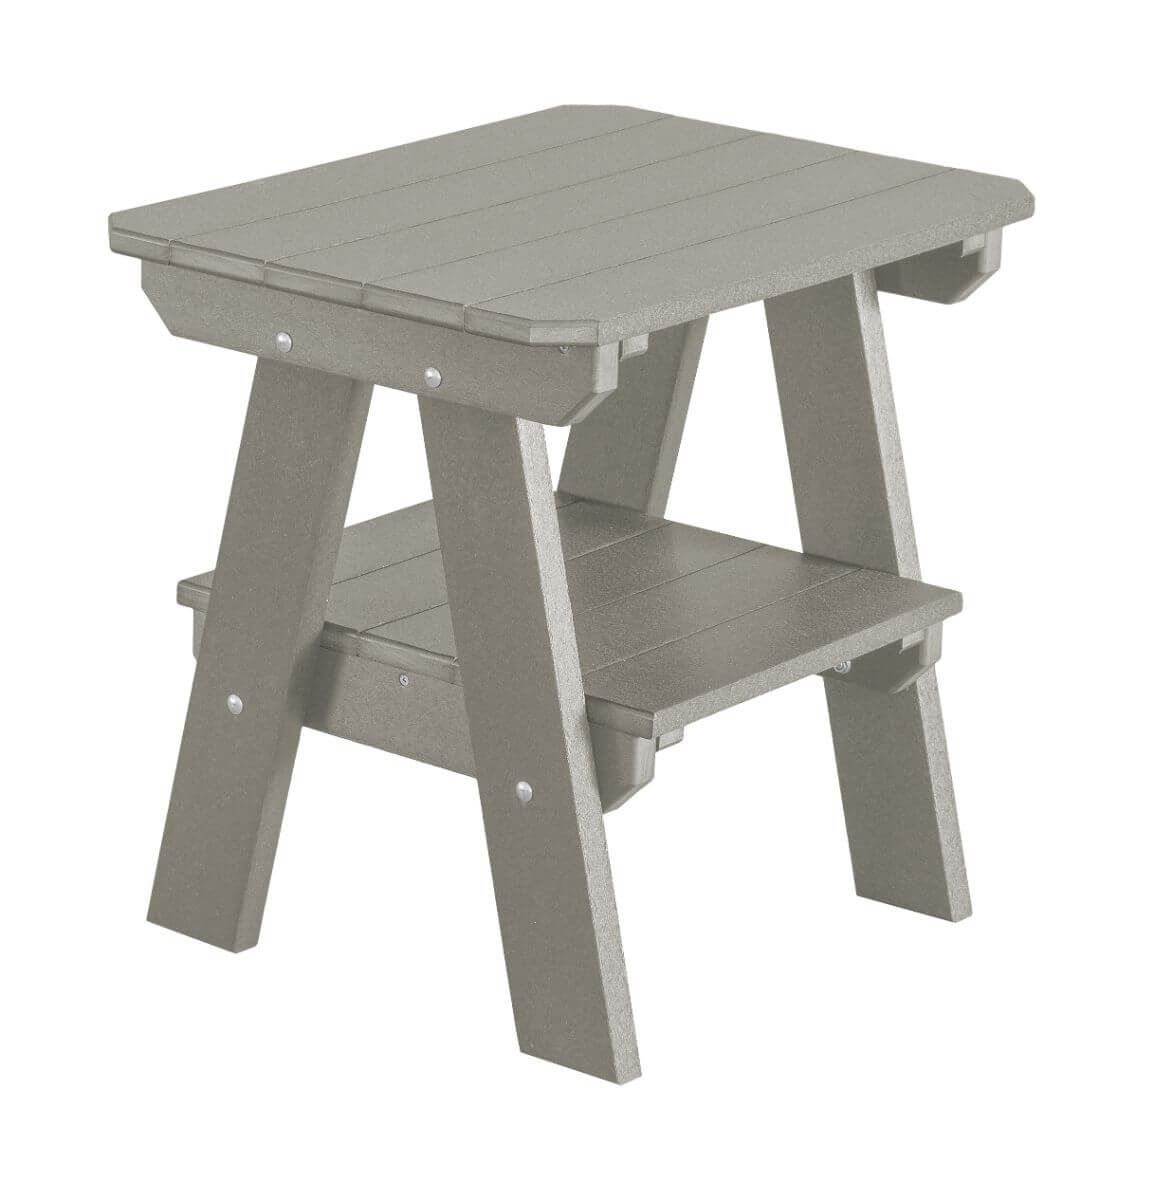 Light Gray Sidra Outdoor End Table